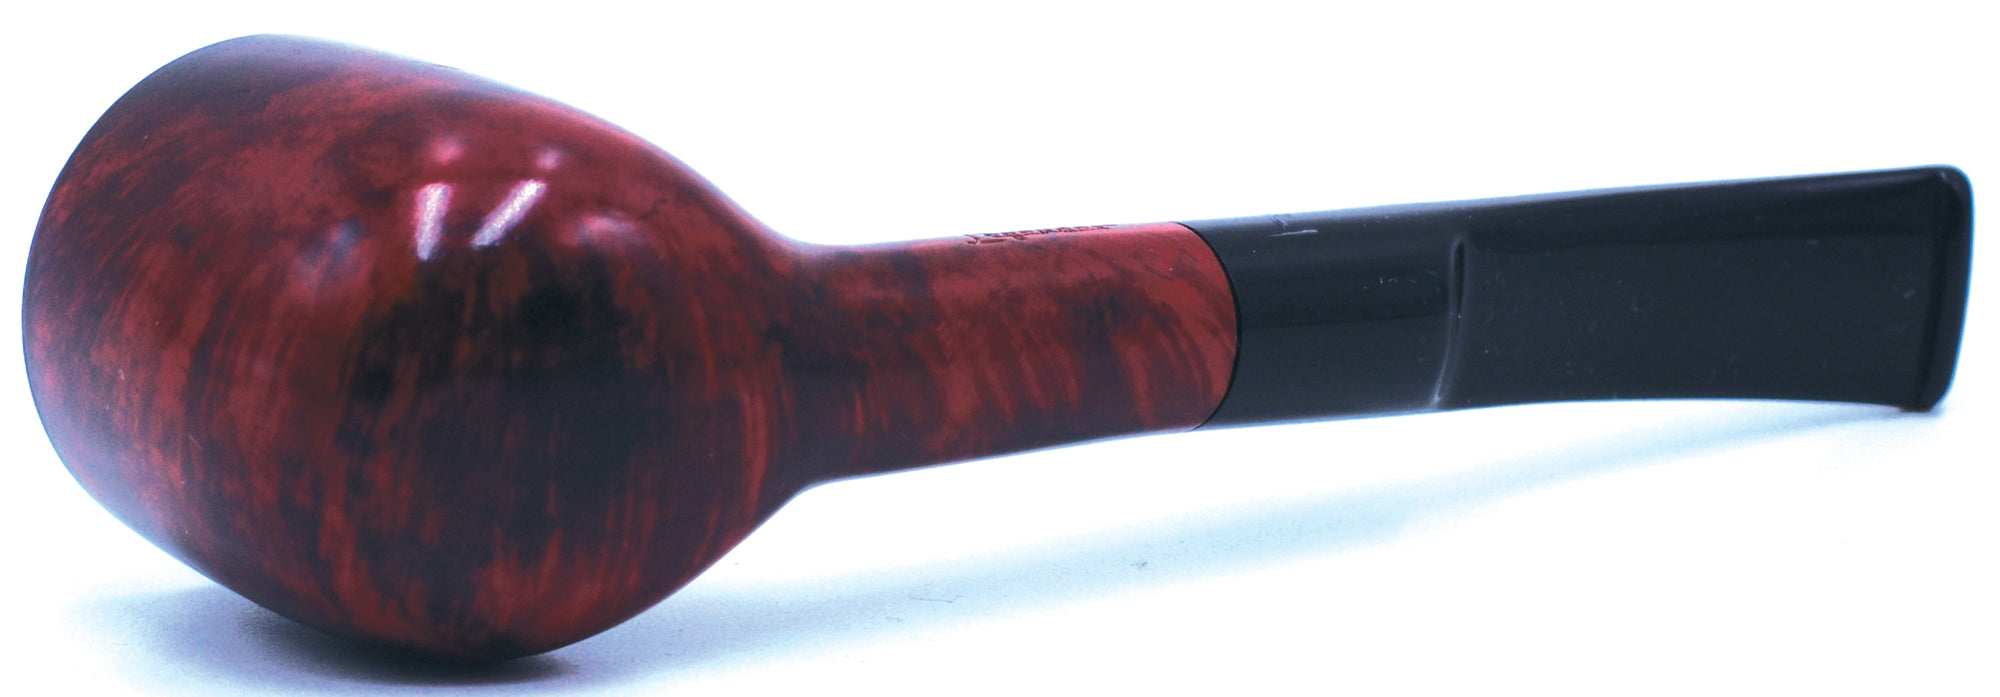 LEGENDEX® PAGANINI* 9 MM Filtered Briar Smoking Pipe Made In Italy 01-08-348